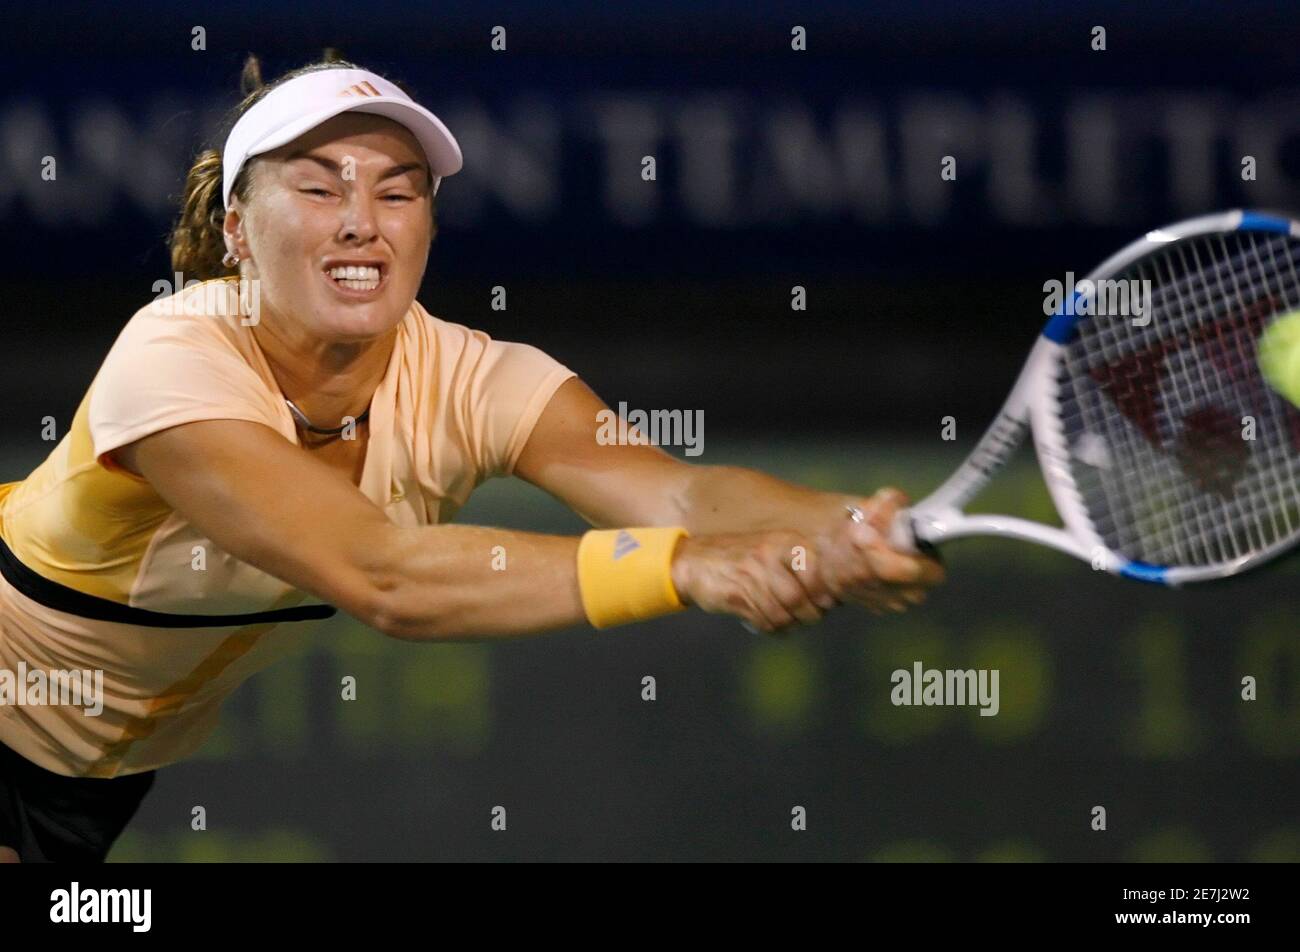 Martina Hingis of Switzerland reaches for a serve from Italy's Flavia Pennetta during play at the 2006 Acura Classic women's tennis tournament in Carlsbad, California August 3, 2006.      REUTERS/Mike Blake (UNITED STATES) Stock Photo